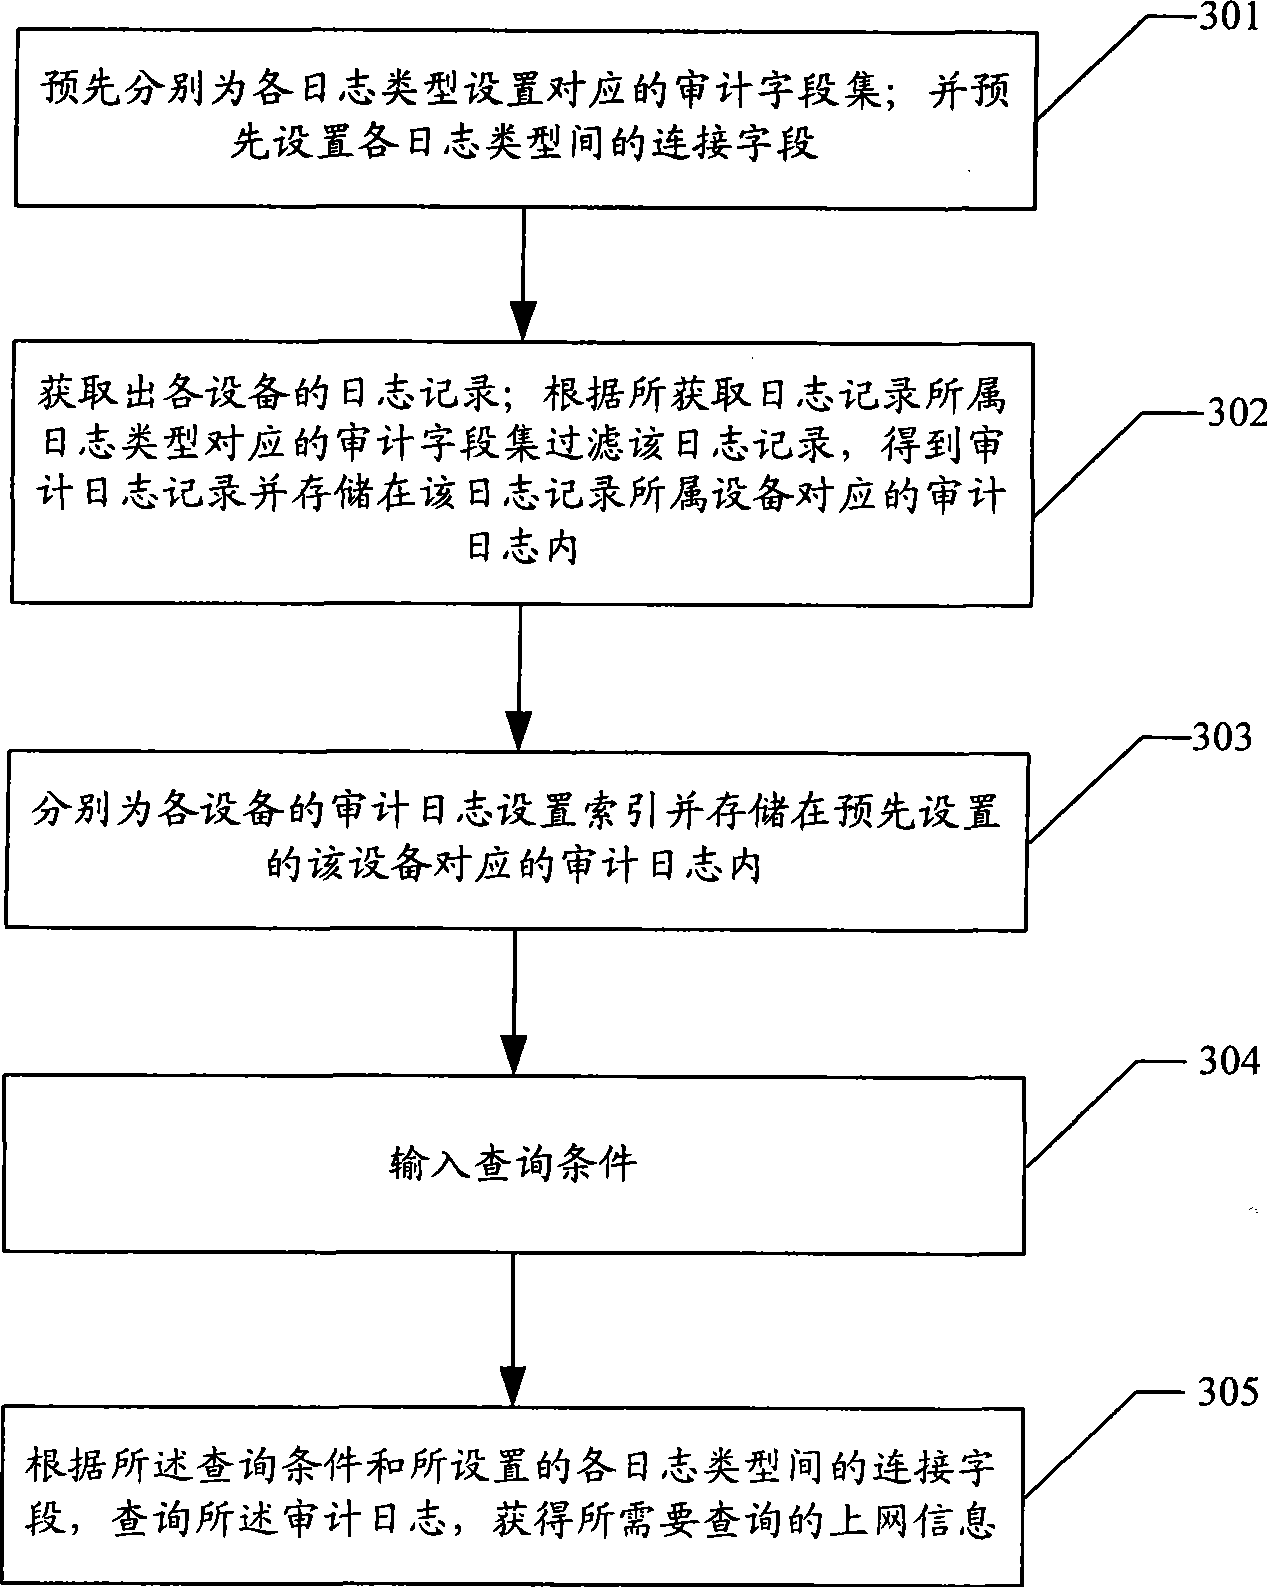 Audit apparatus and method for customer network behavior